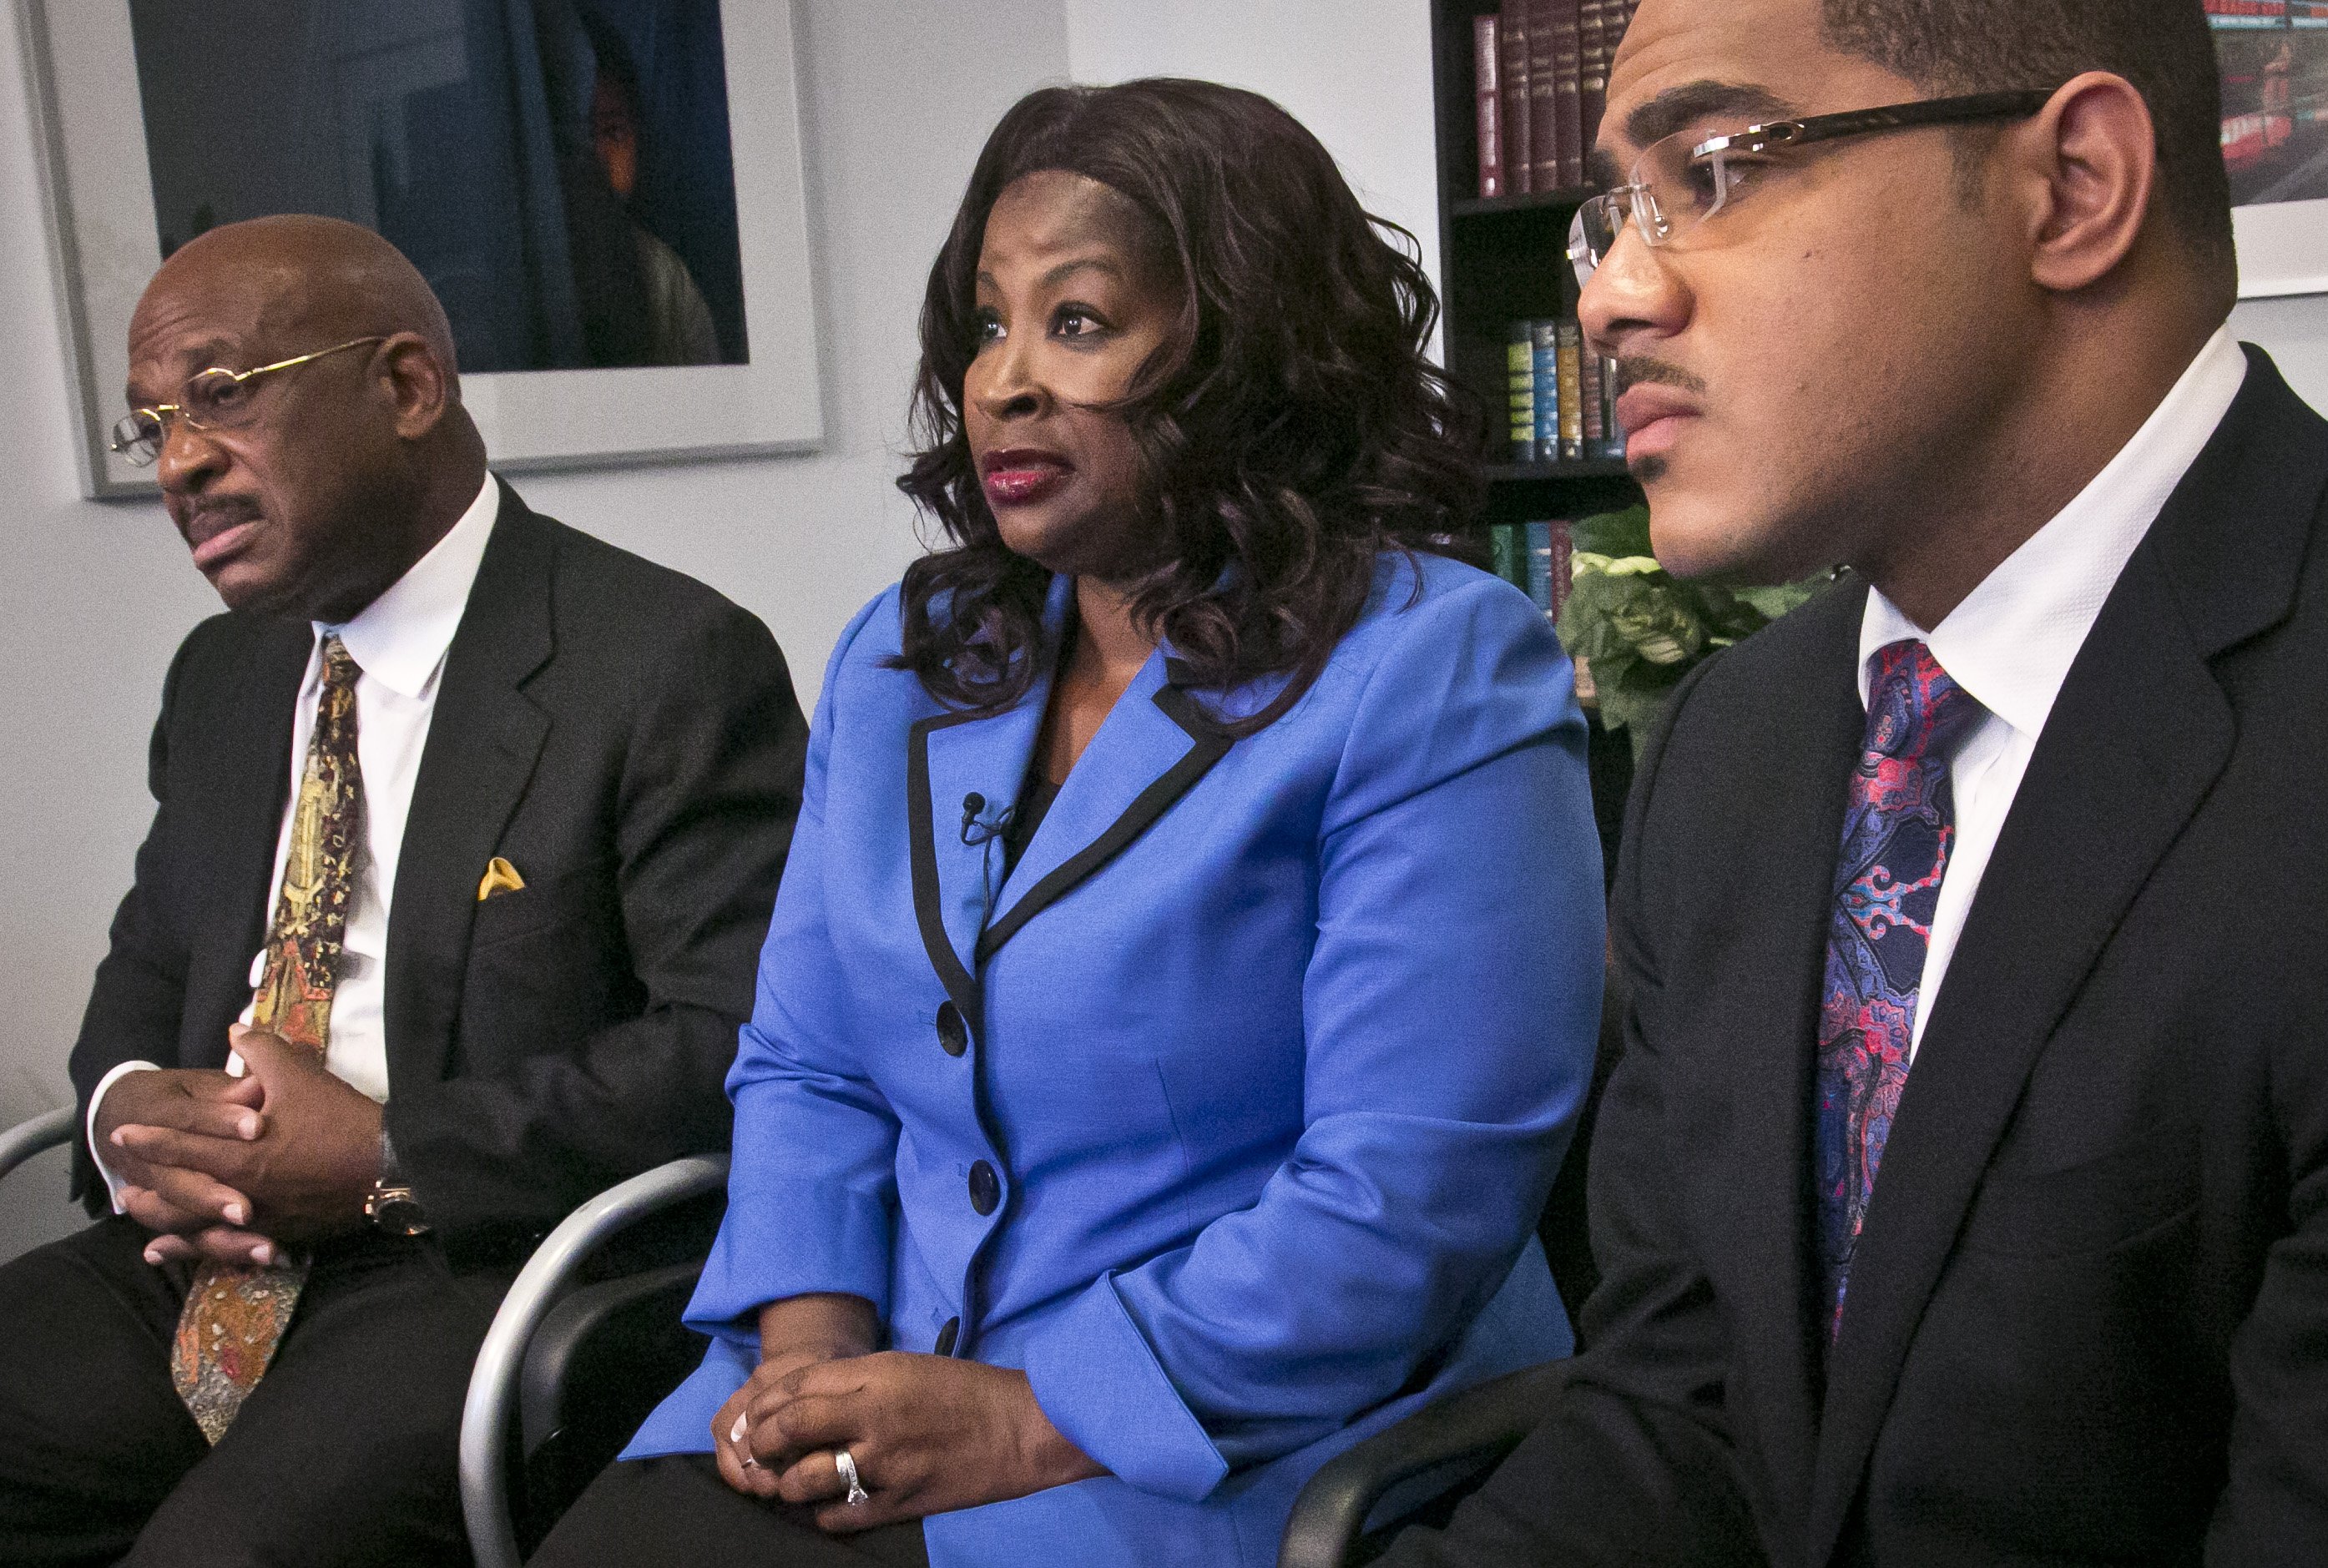 Cynthia Robinson with her attorneys Willie Gary (left) and Christopher Chestnut (right) as she speaks during an interview on July 21, 2014 in New York City.